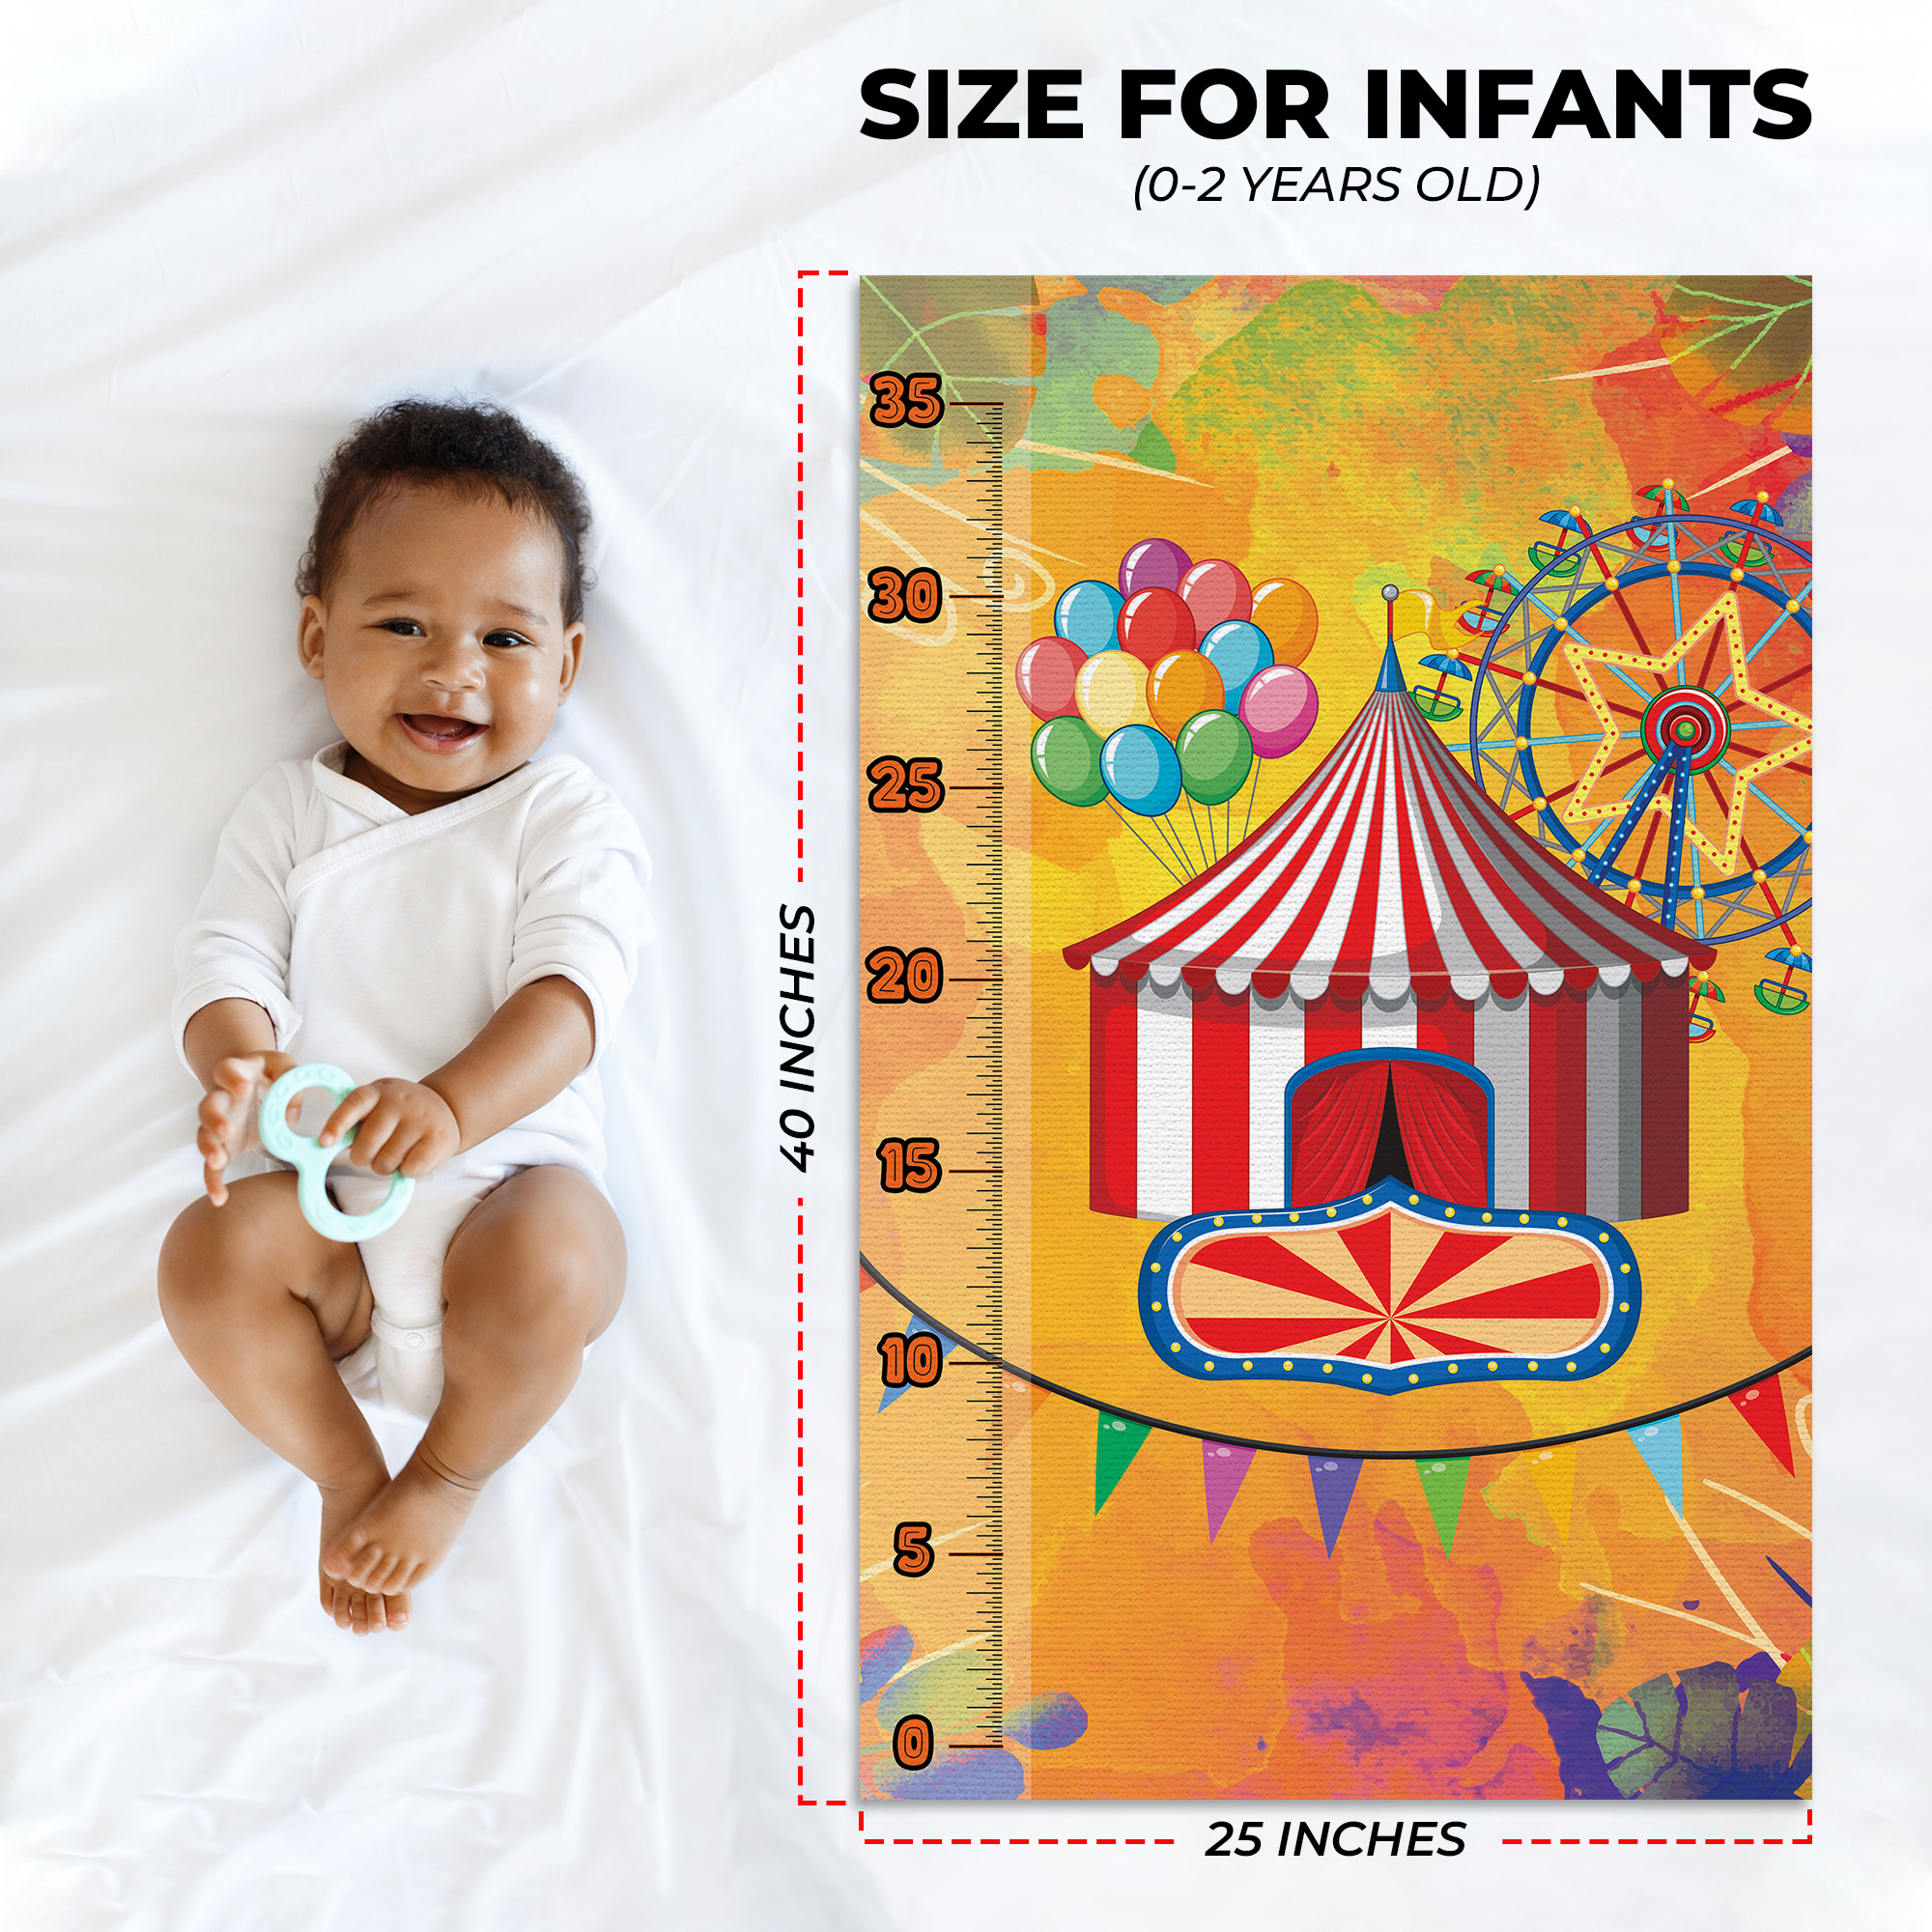 Circus Infant Growth Chart